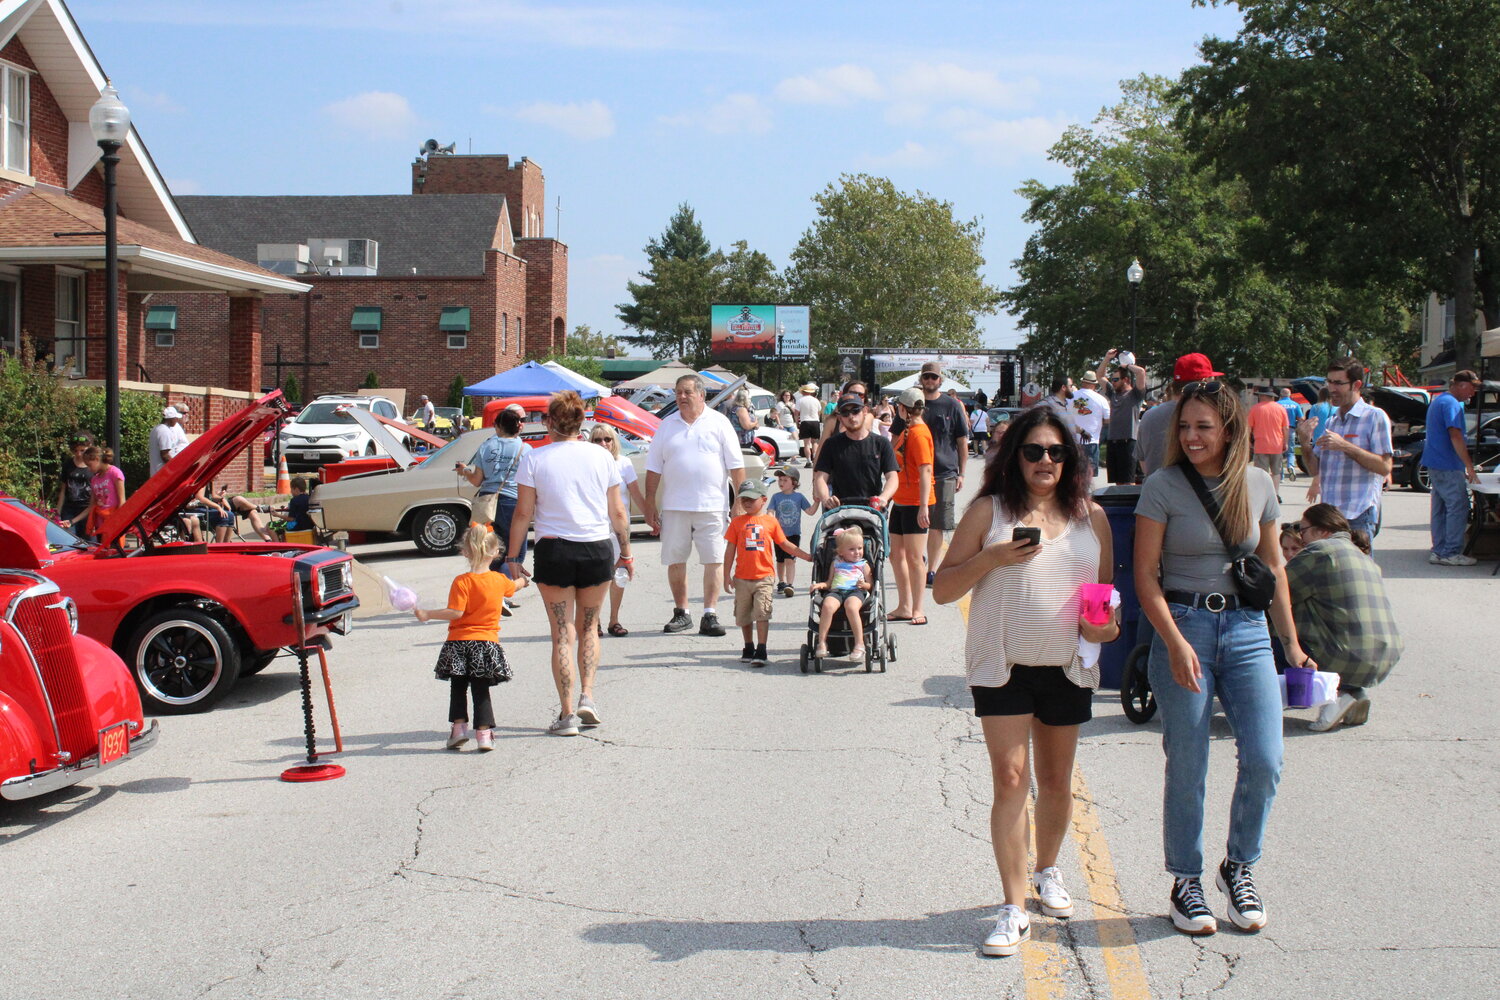 Main Street was packed with people during the event.